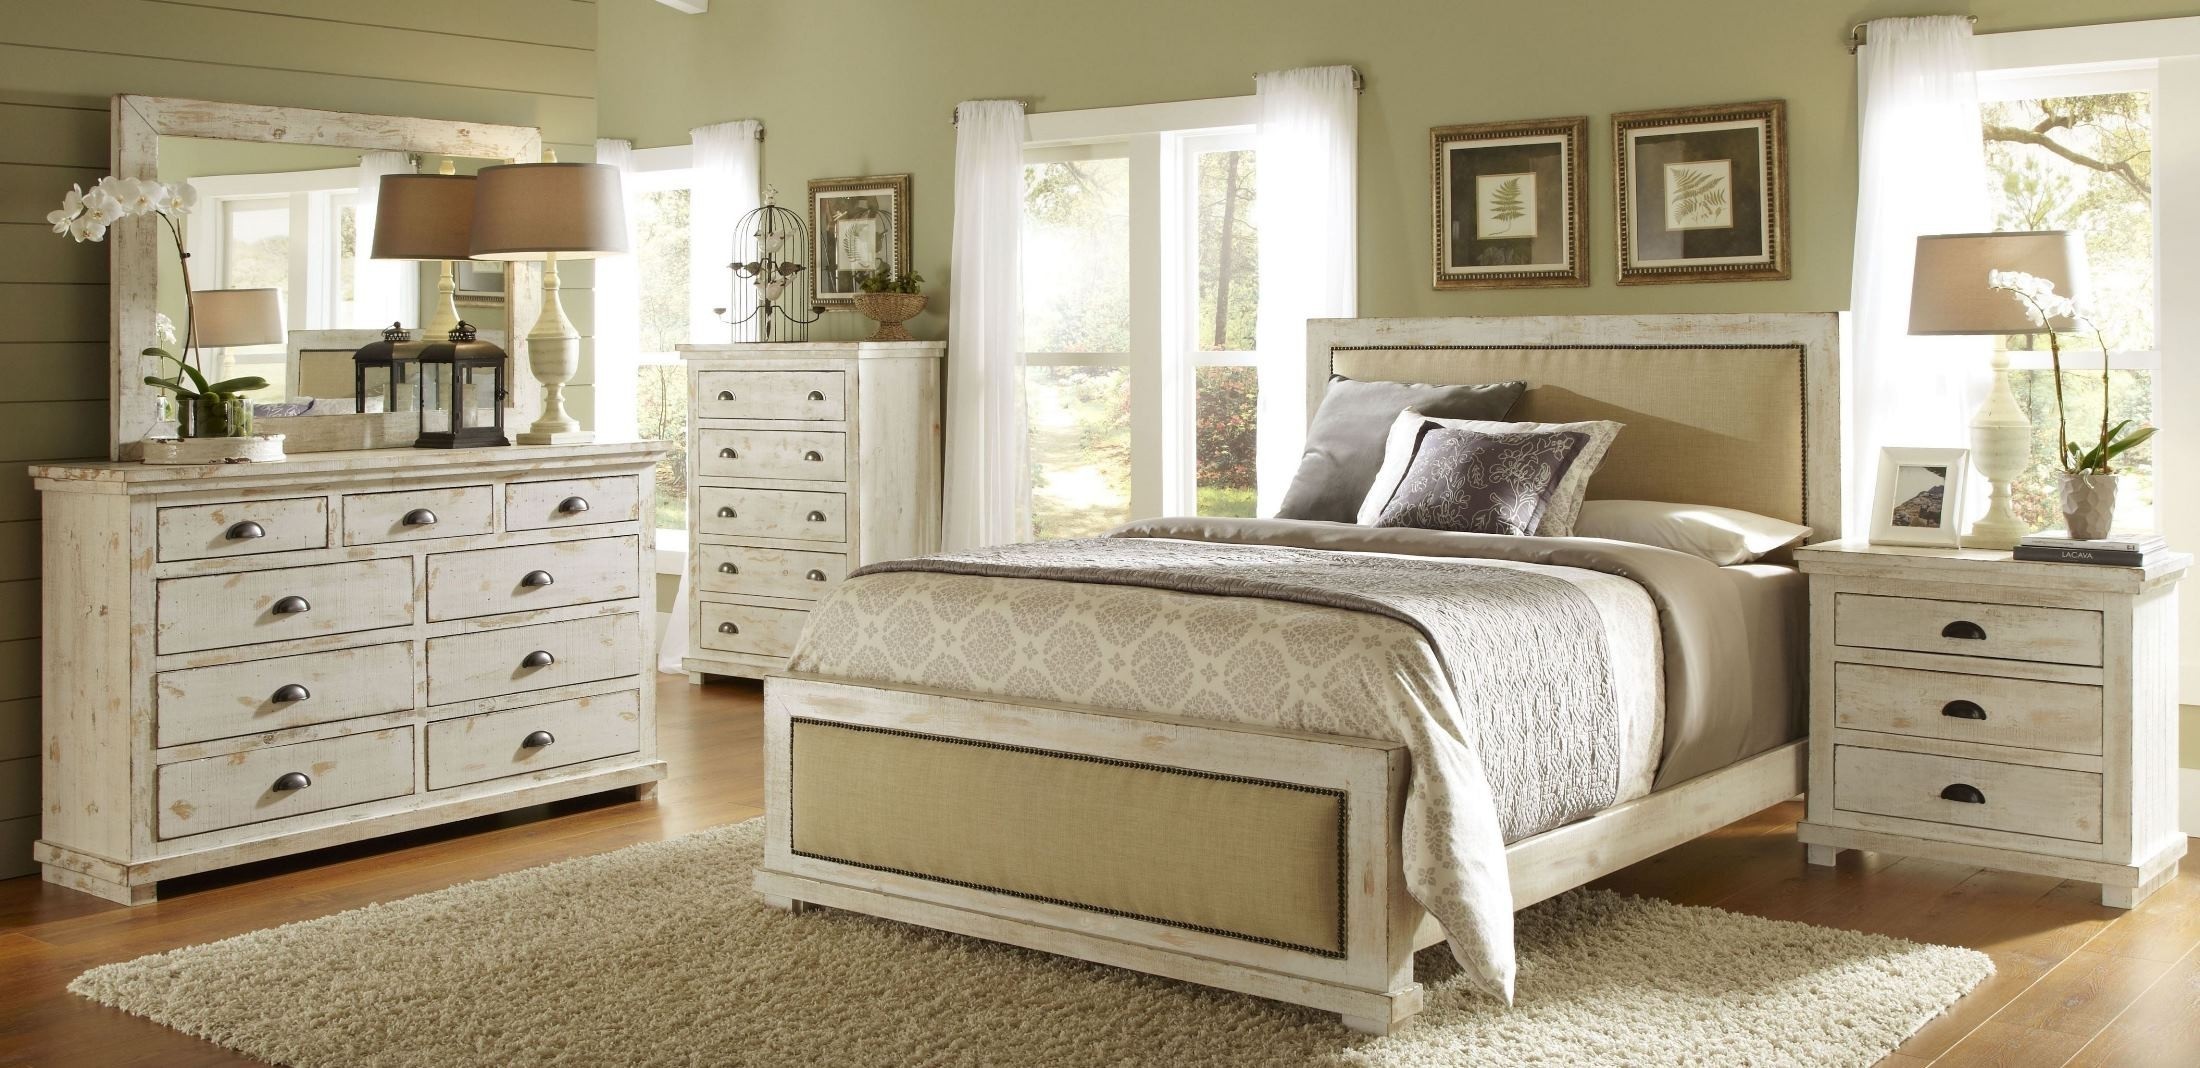 Willow distressed white upholstered bedroom set from 1